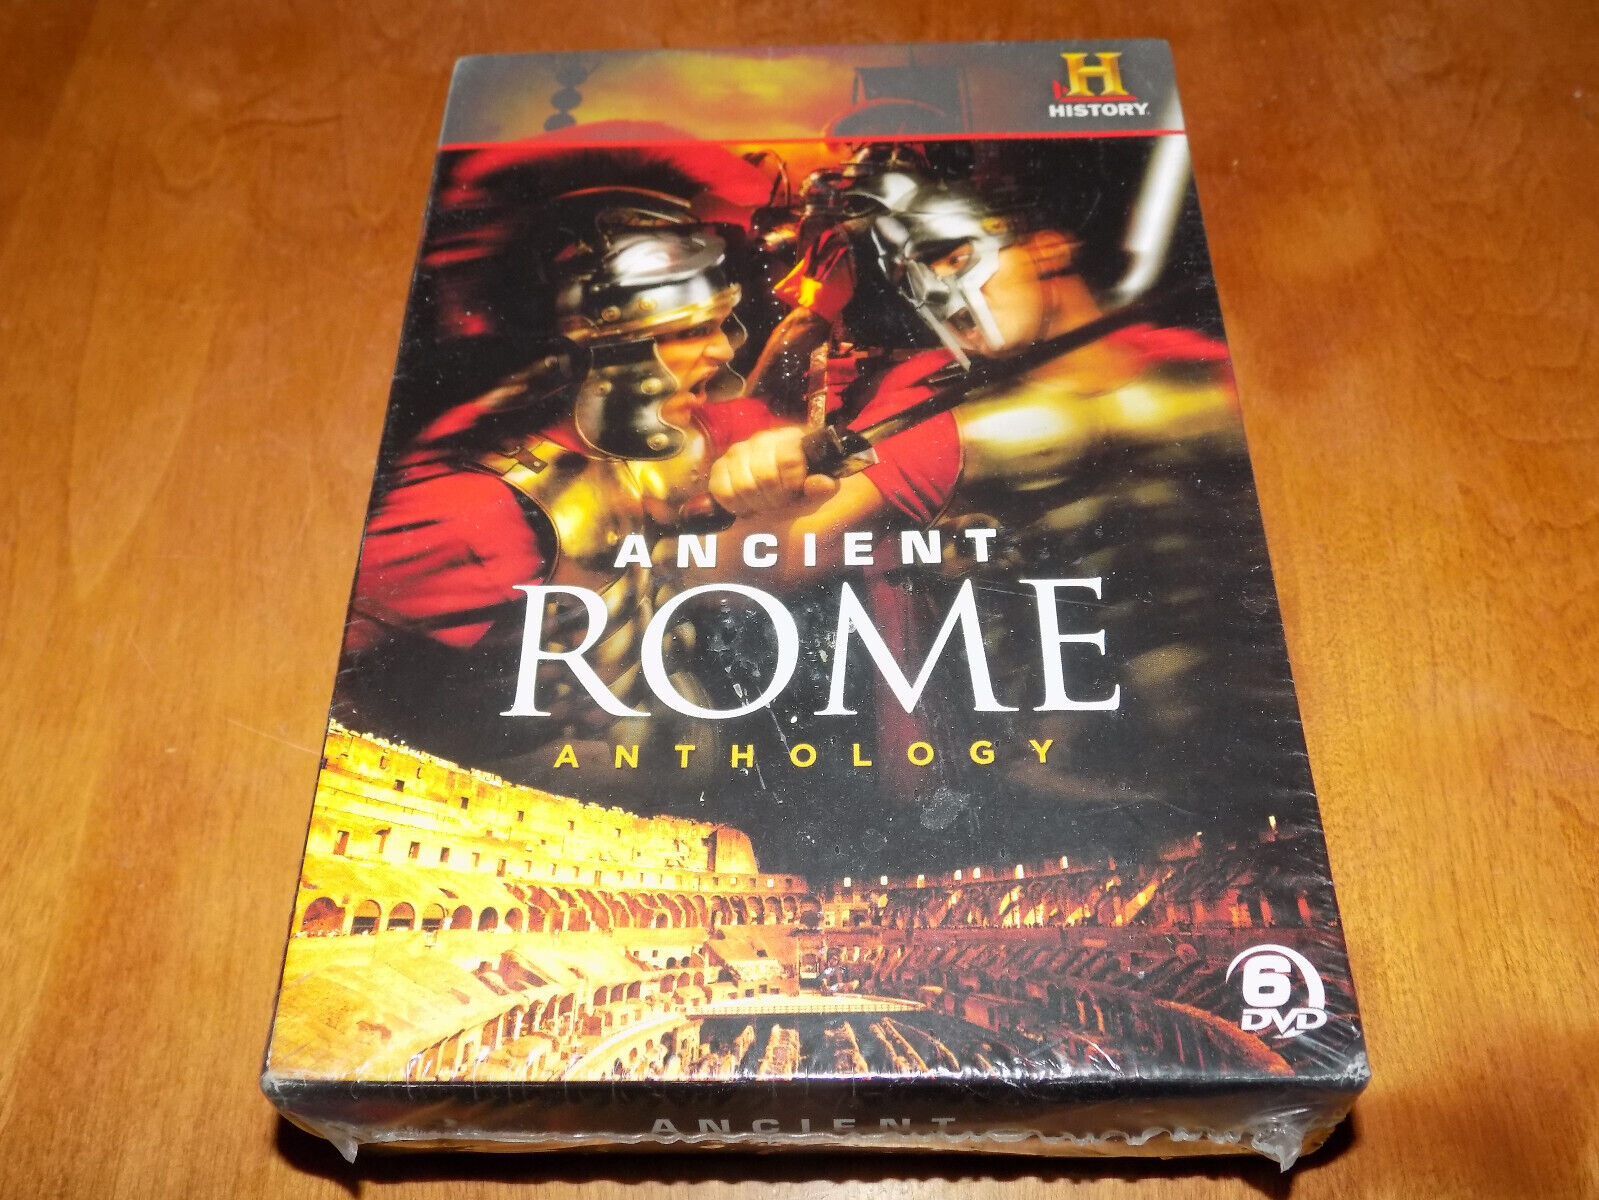 THE ANCIENT ROME ANTHOLOGY Roman Empire Battles History Channel 6 DVD SET  NEW